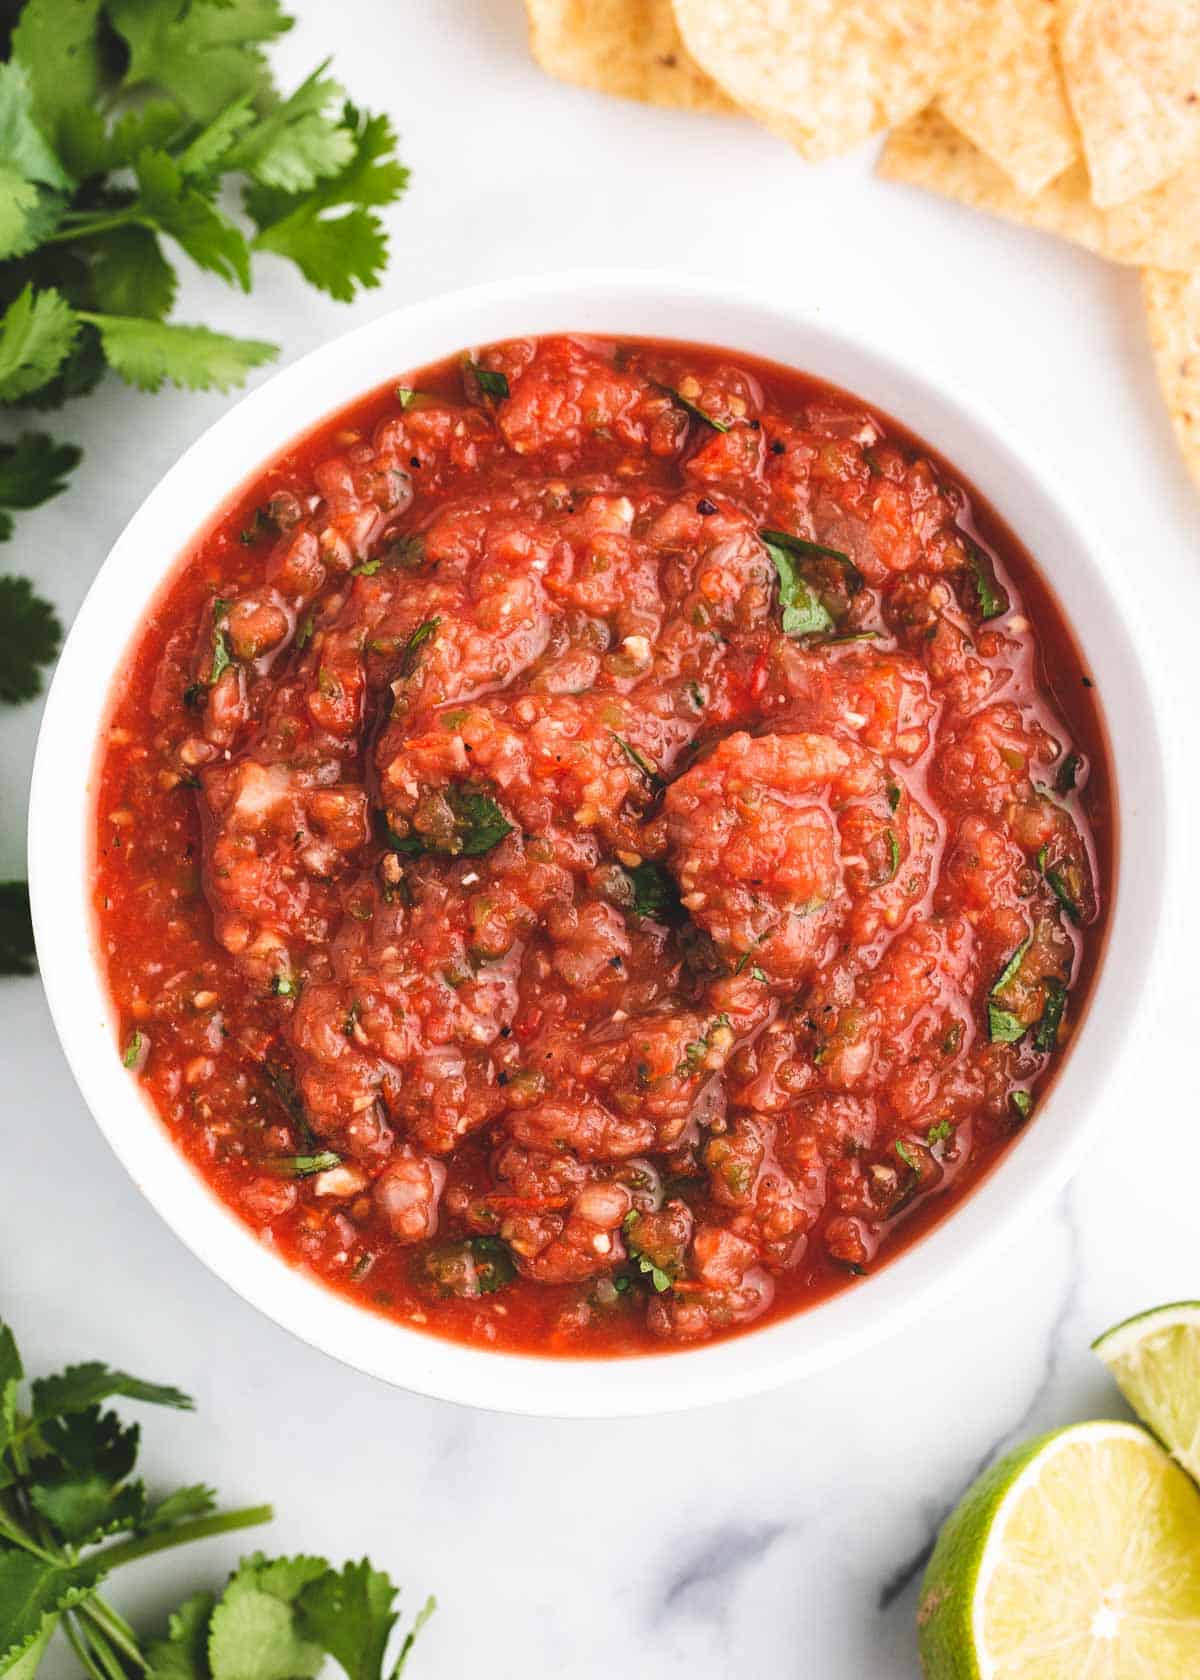 Roasted salsa in a bowl.